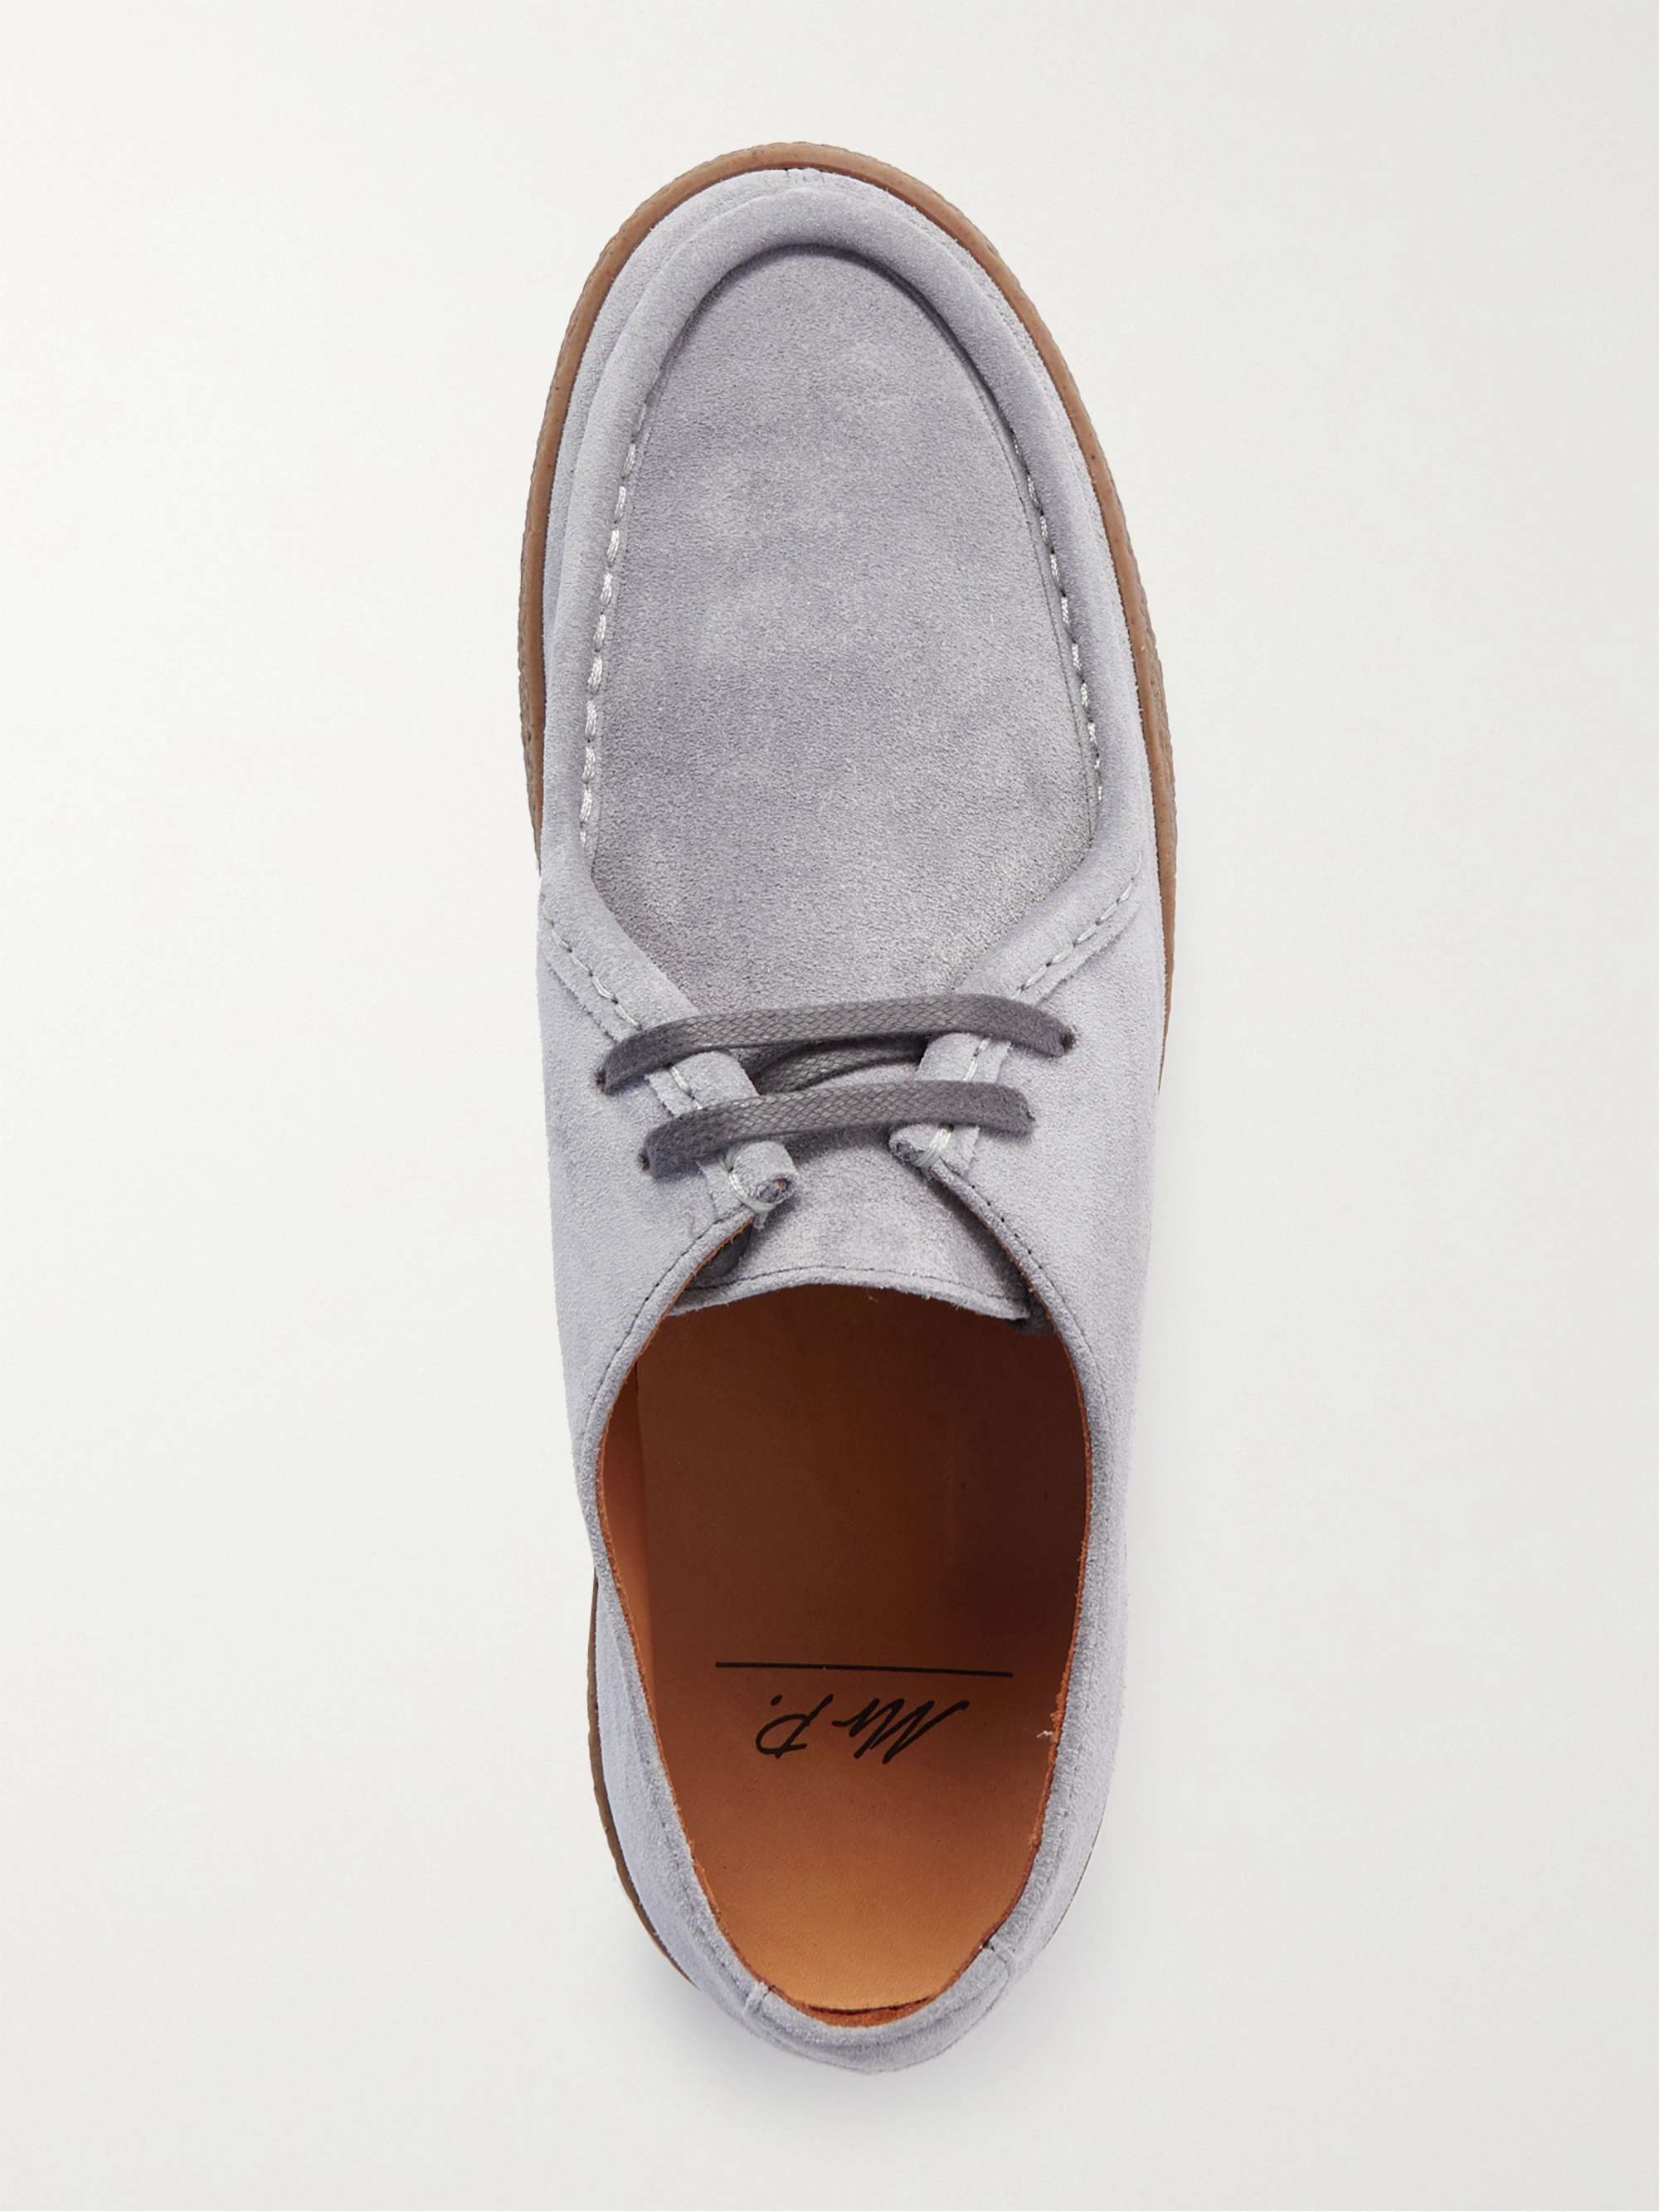 MR P. Larry Regenerated Suede by evolo® Derby Shoes